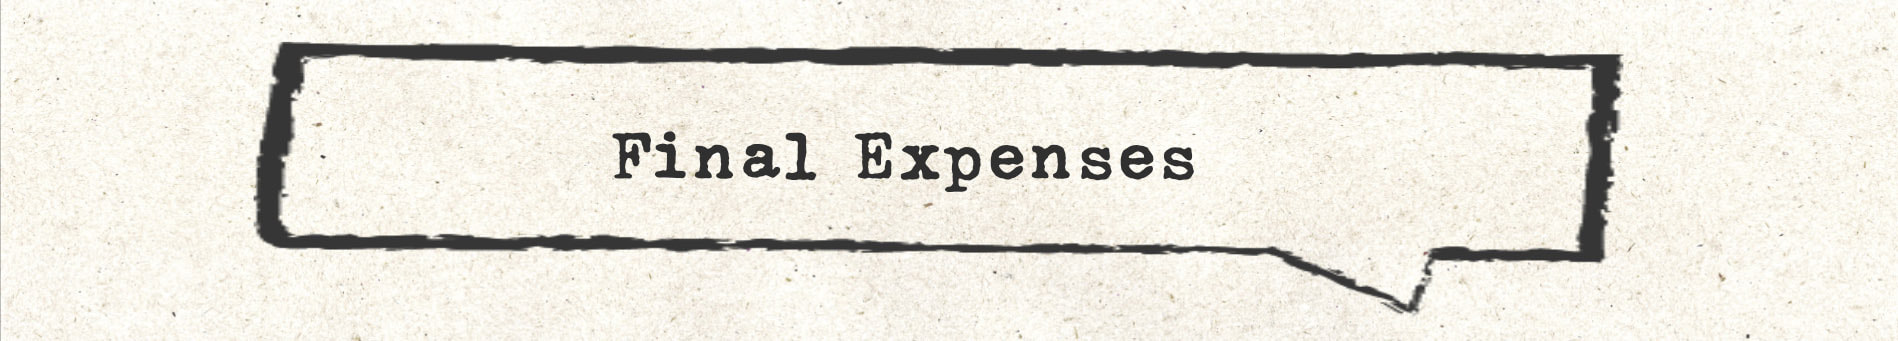 Final Expenses Insurance